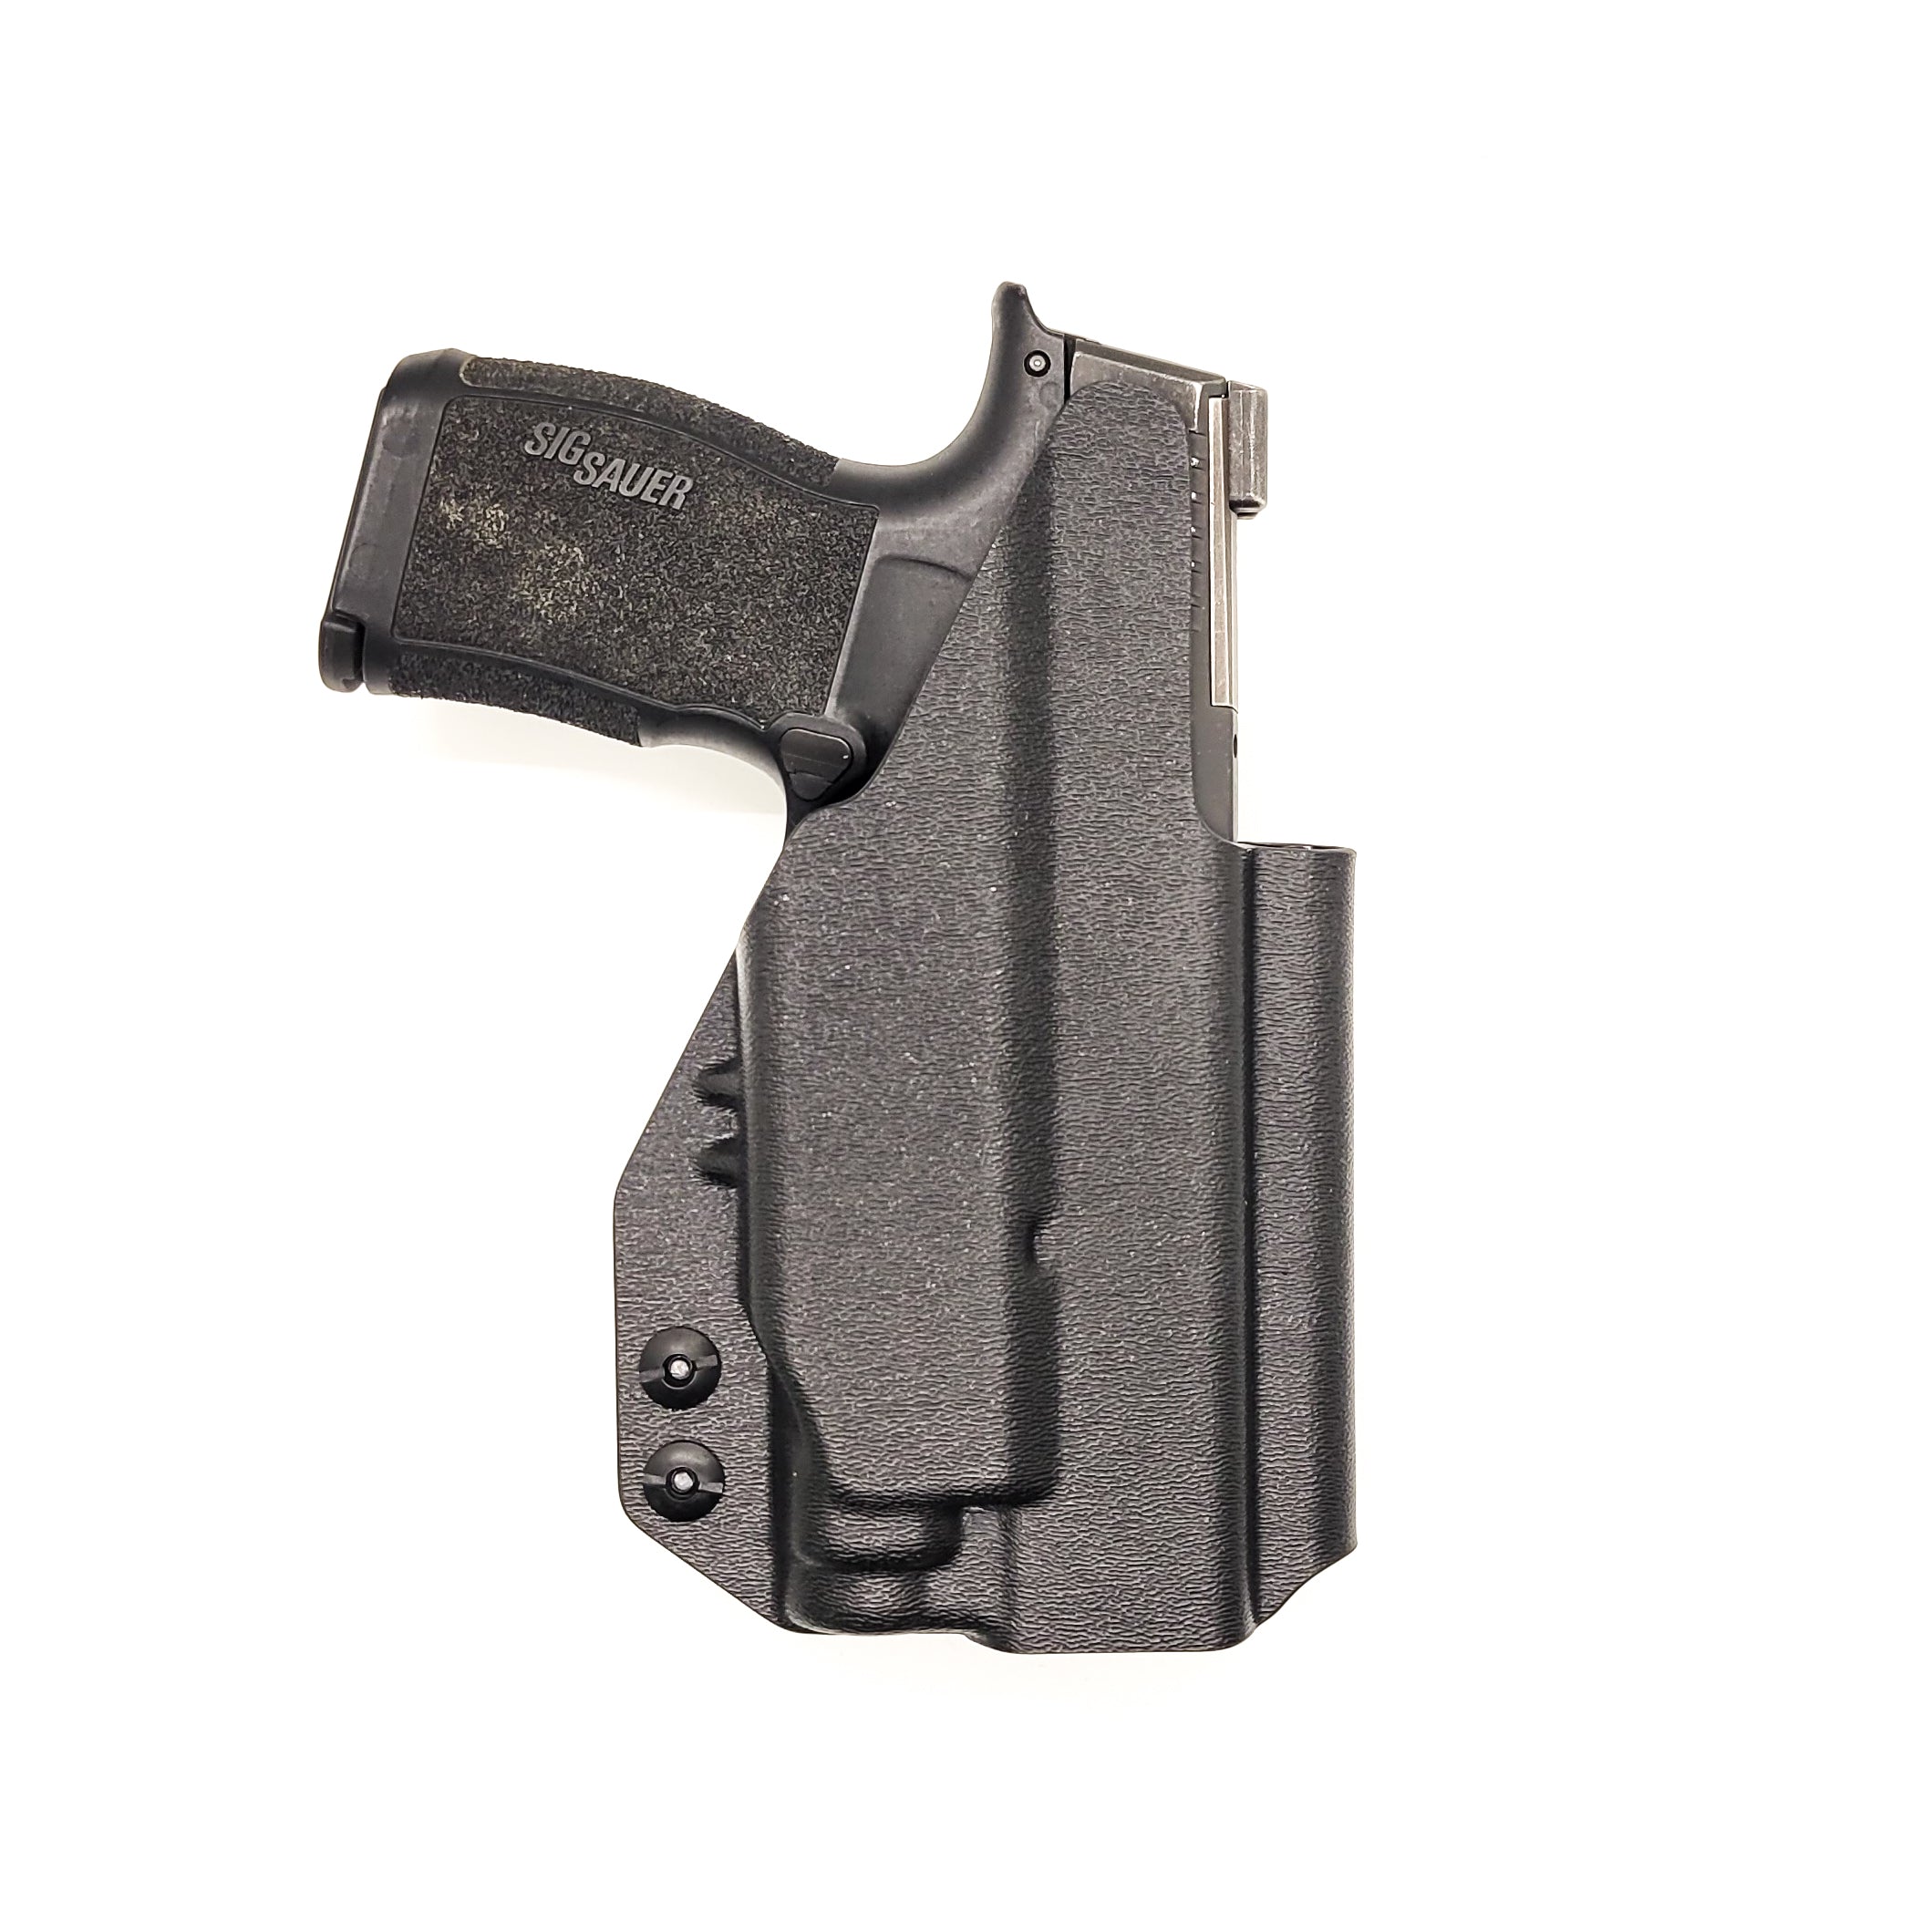 For the best, most comfortable Inside Waistband Kydex  Holster designed to fit the Sig Sauer P365XL P365 P 365 X XL pistol with the Streamlight TLR-7 Sub light (Part # 69401), shop Four Brothers Holsters. Full sweat guard, adjustable retention, minimal material, and smooth edges open Muzzle, cleared for red dot optics.